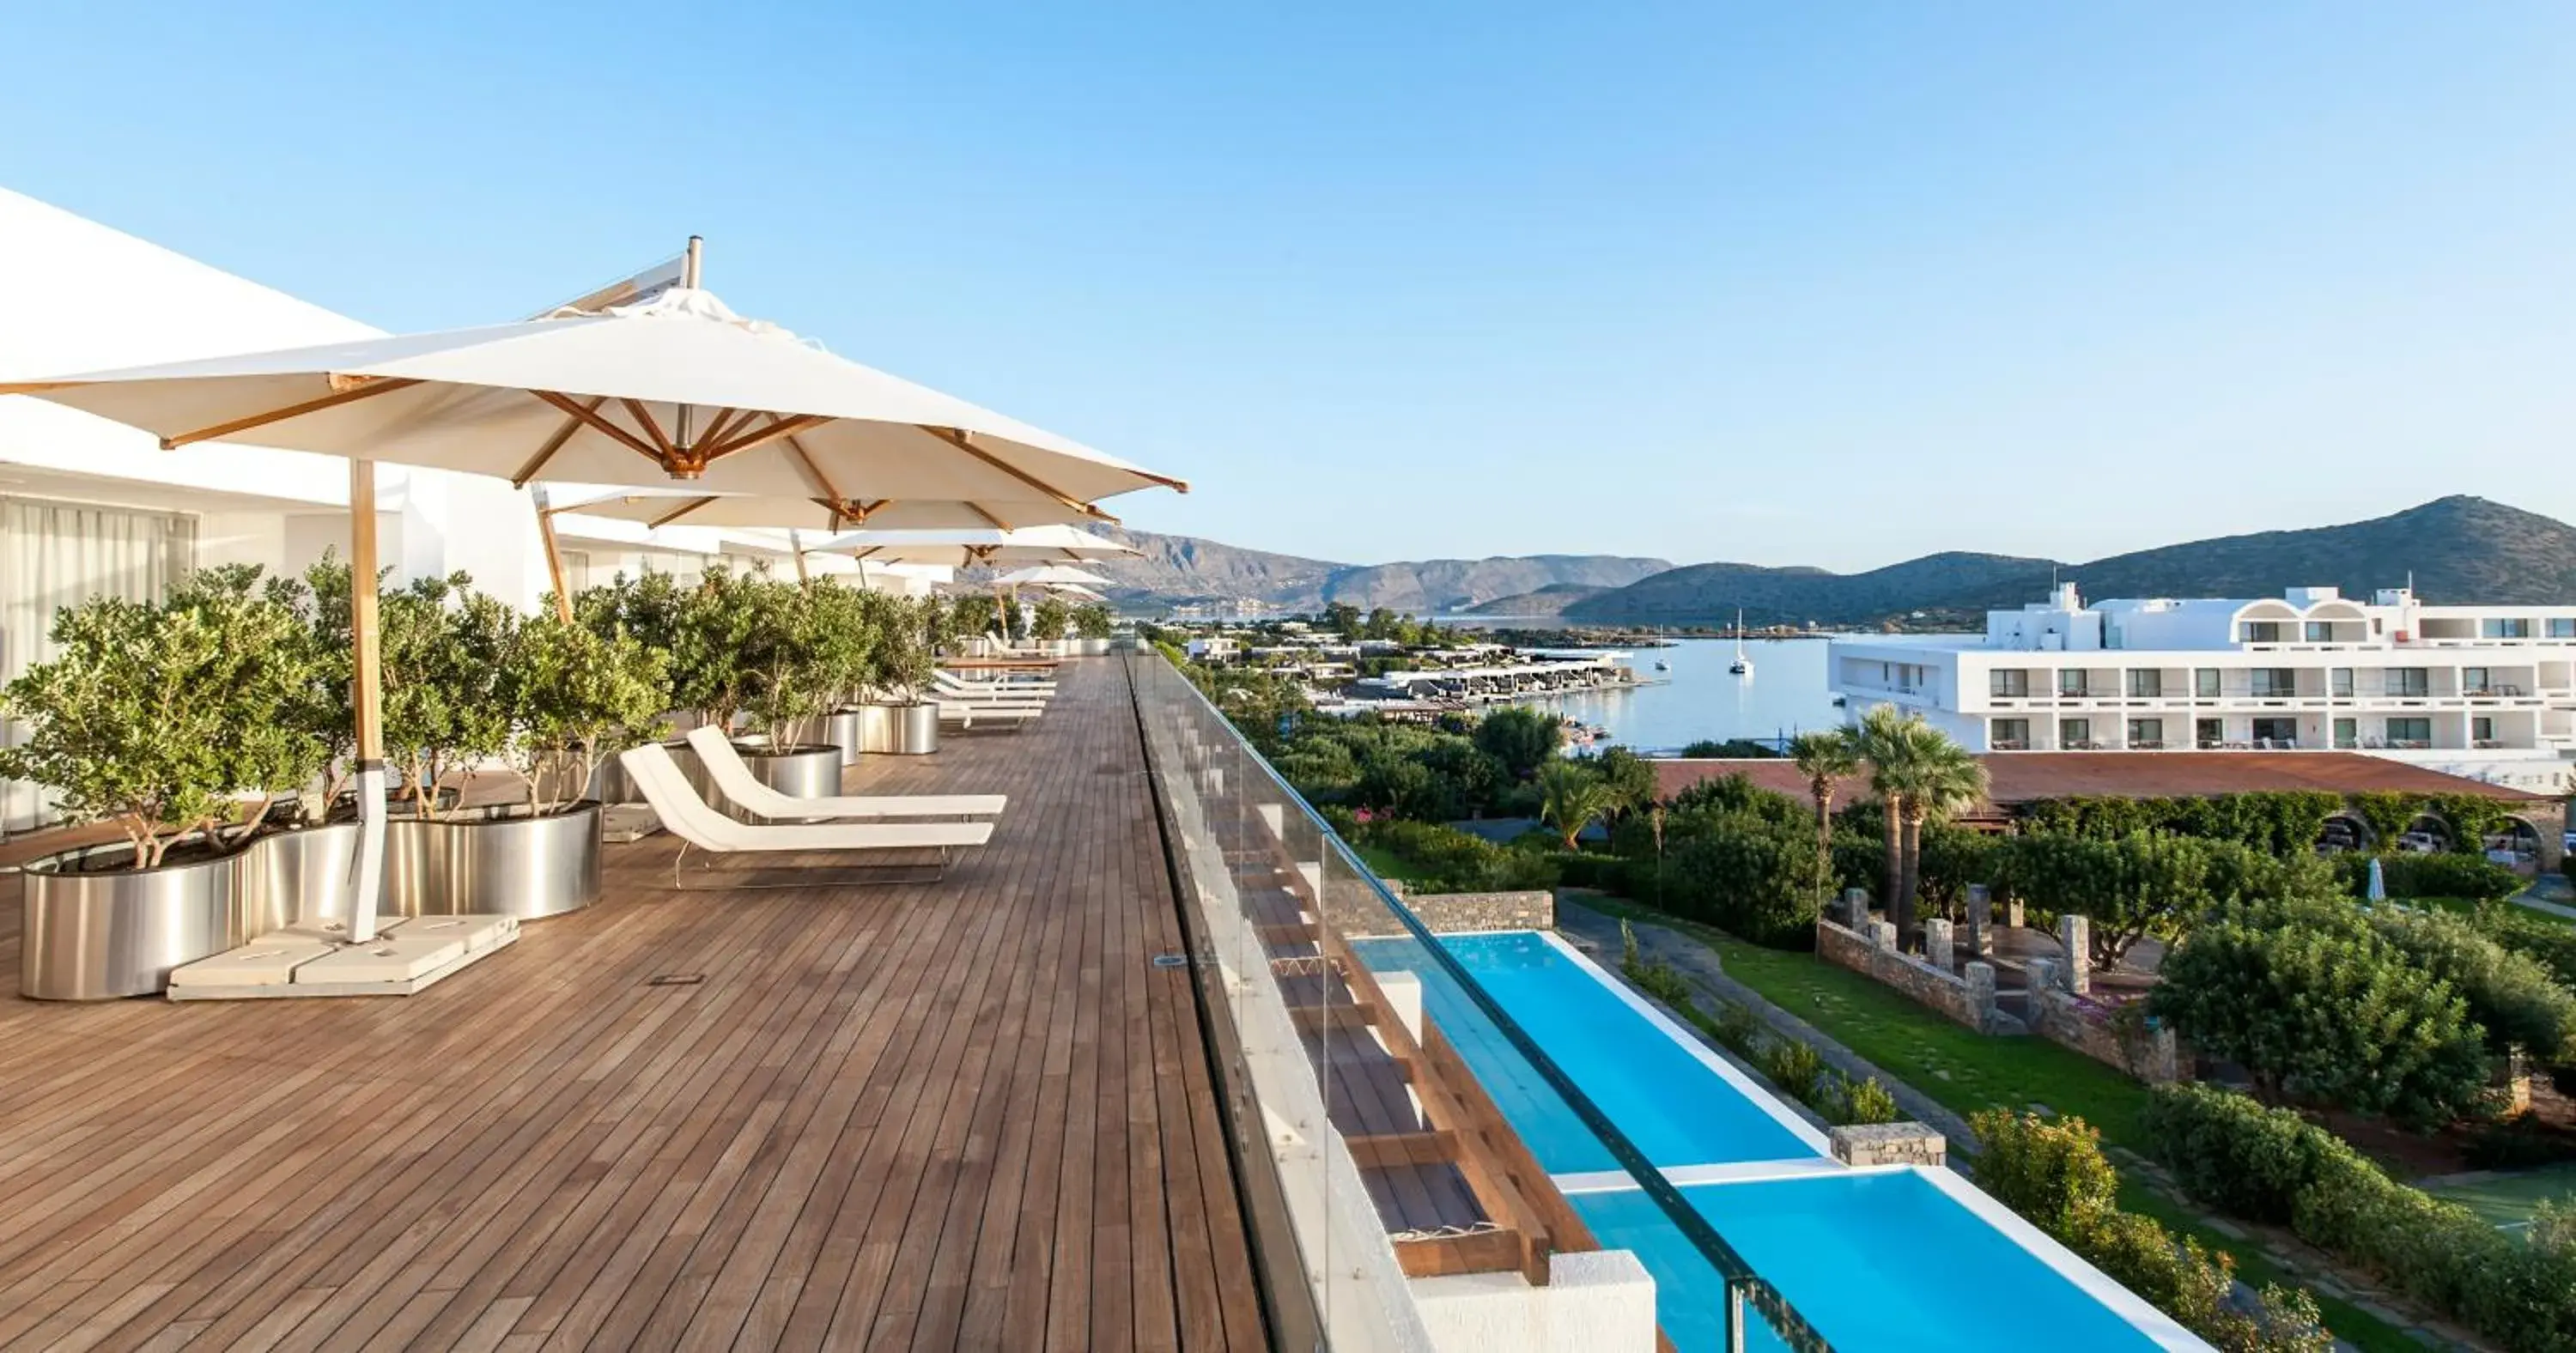 Balcony/Terrace, Swimming Pool in Elounda Beach Hotel & Villas, a Member of the Leading Hotels of the World